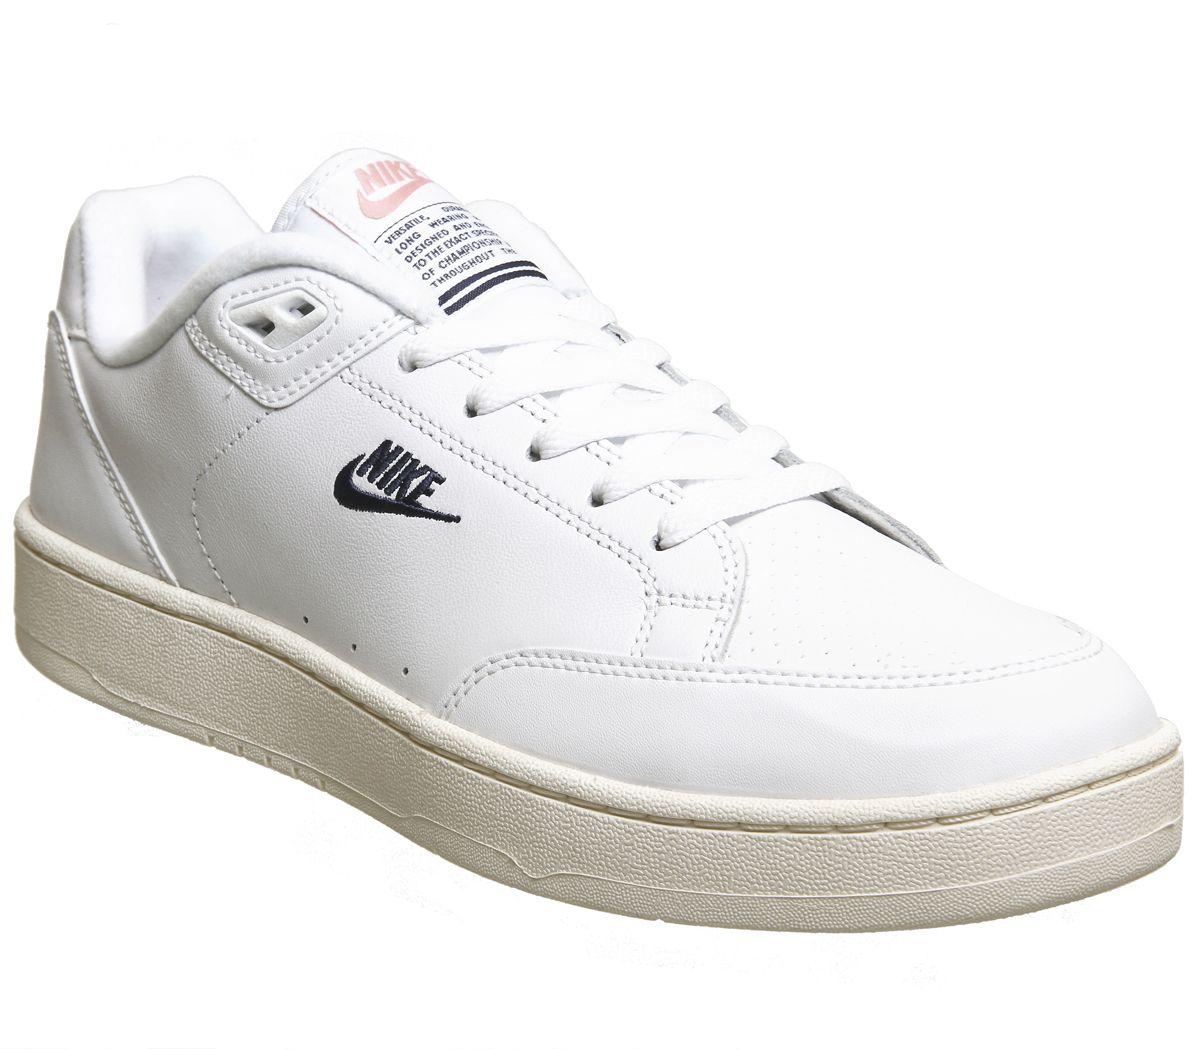 Nike Leather Grandstand 2 in White Navy (White) for Men - Lyst